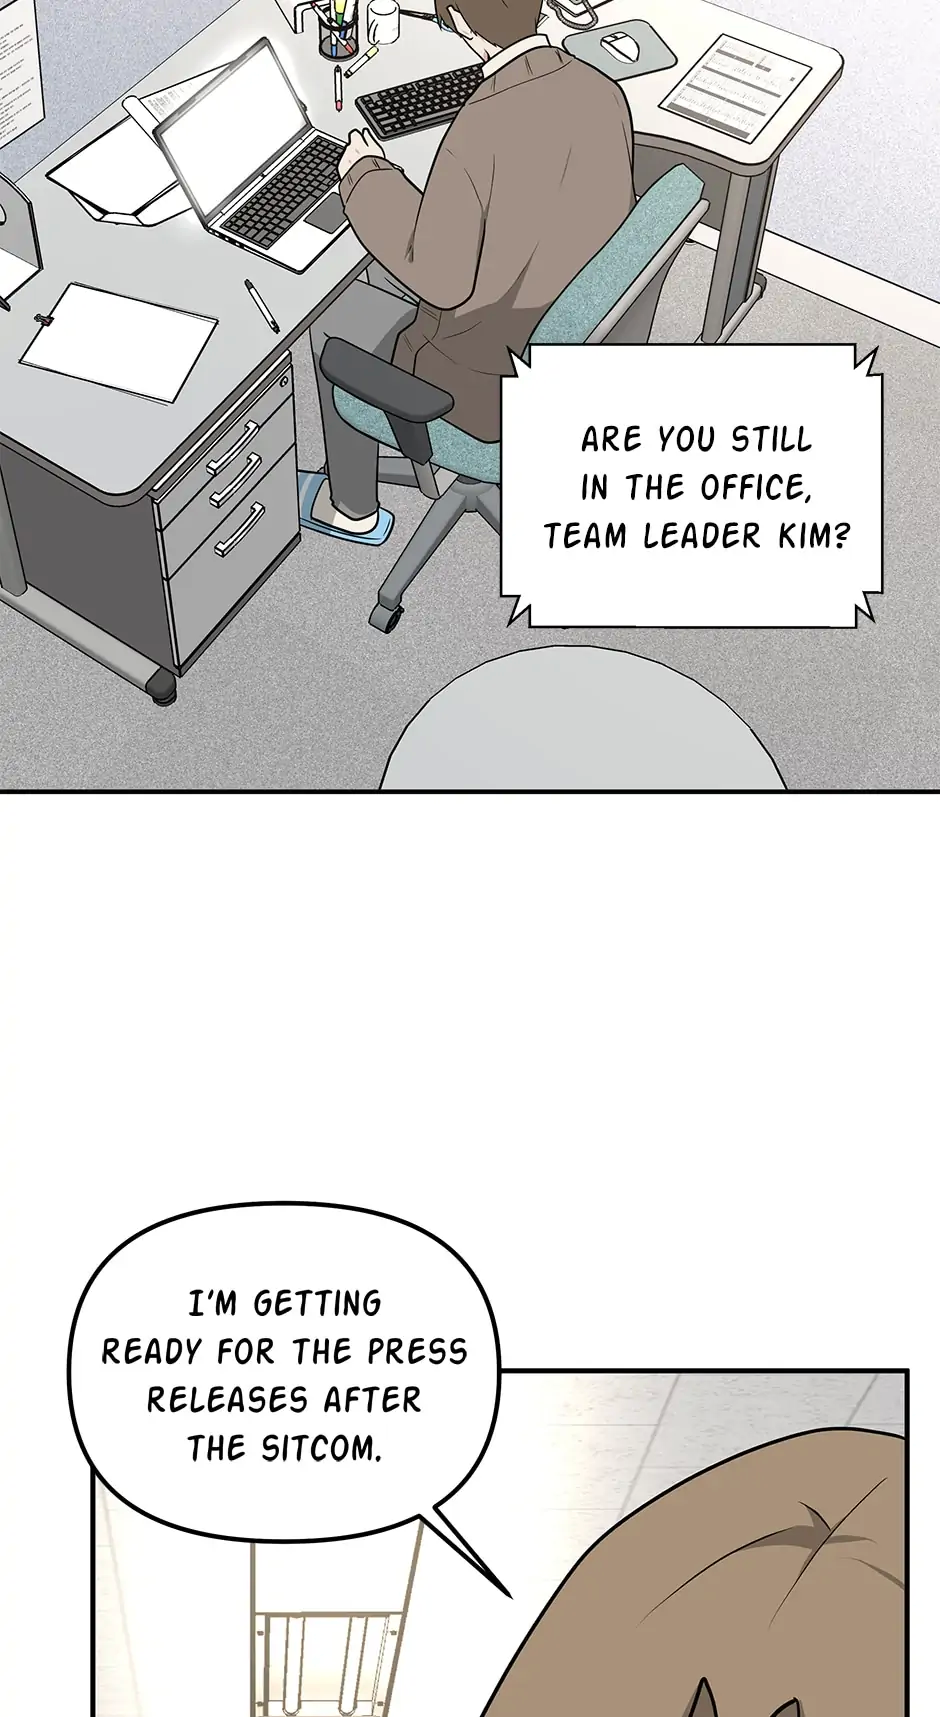 Where Are You Looking, Manager? - Page 3